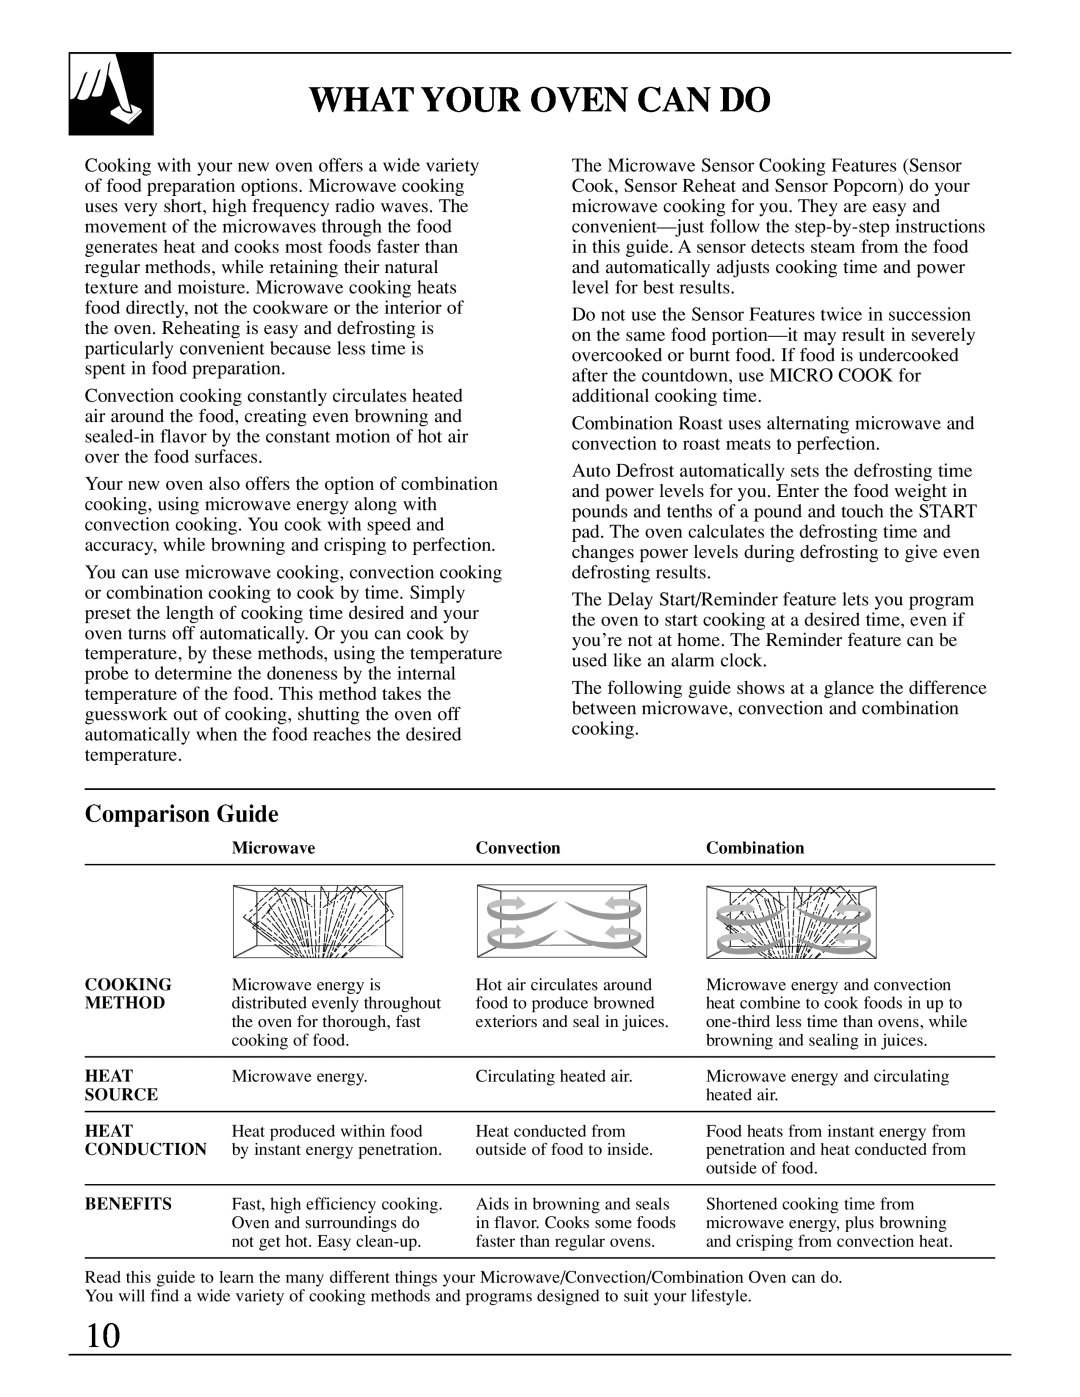 GE JEB1095 warranty What Your Oven Can Do, Comparison Guide 